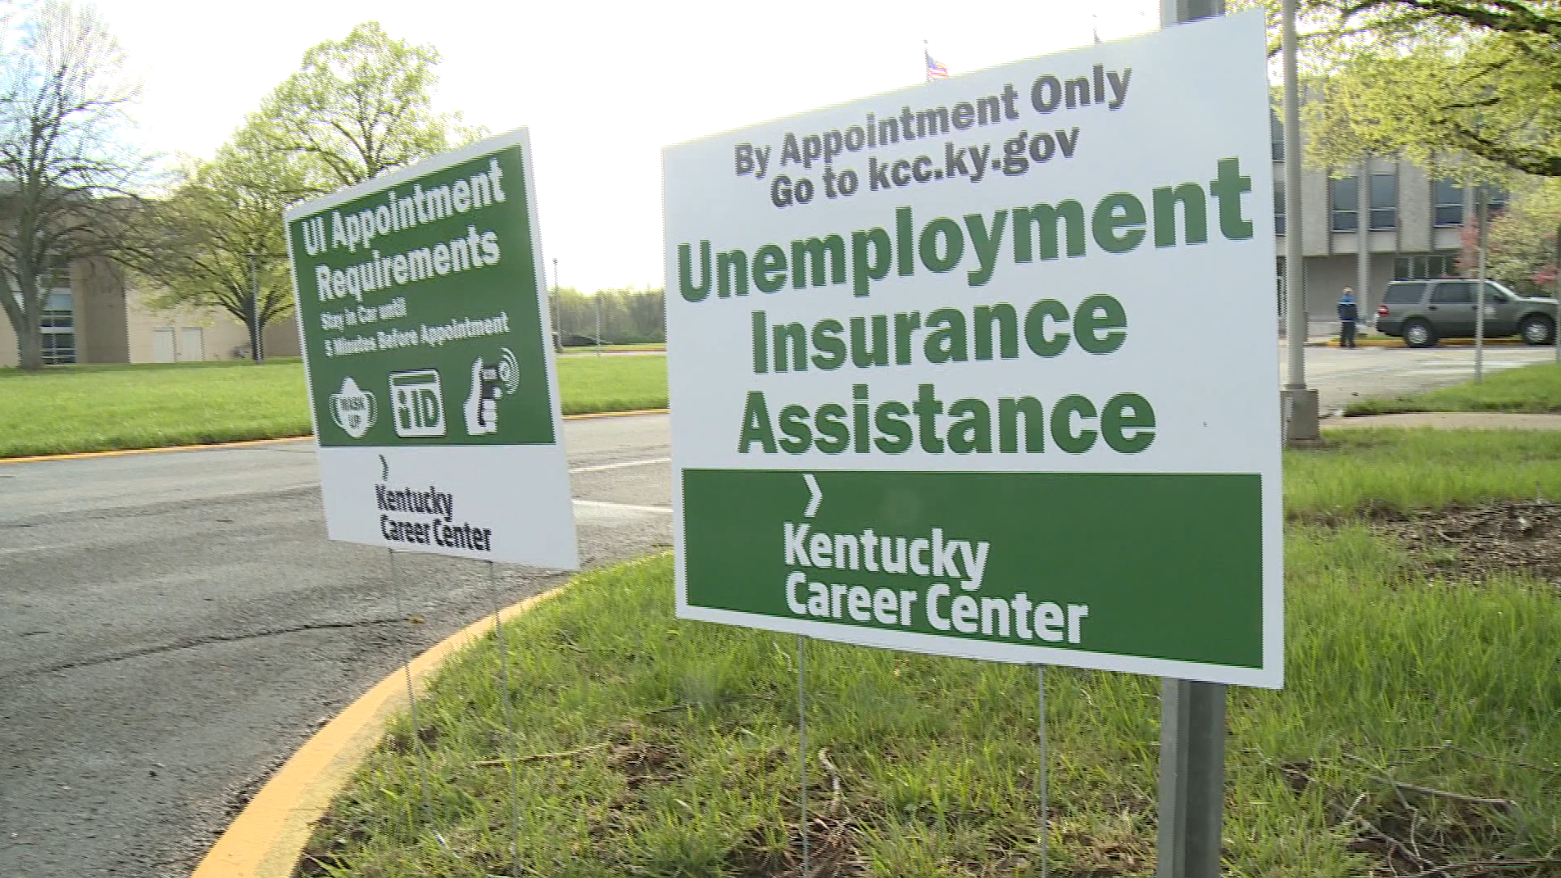 If You Are Unemployed - Kentucky Career Center